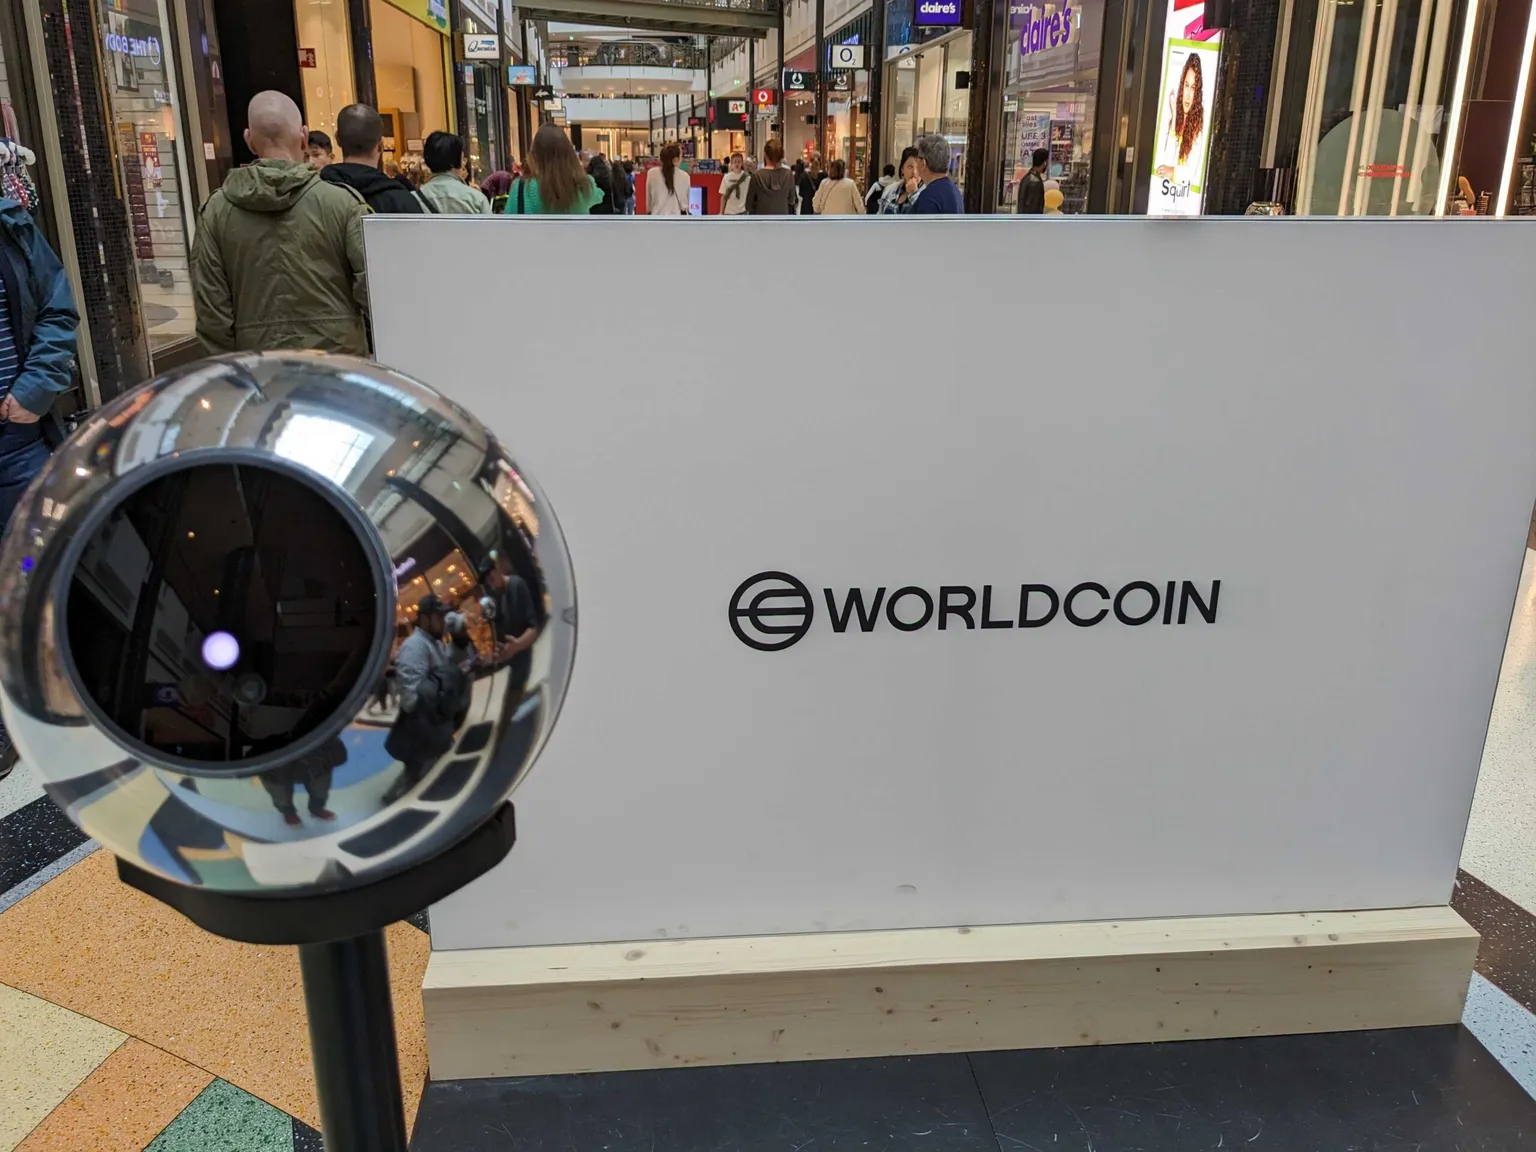 L'orbe Worldcoin.